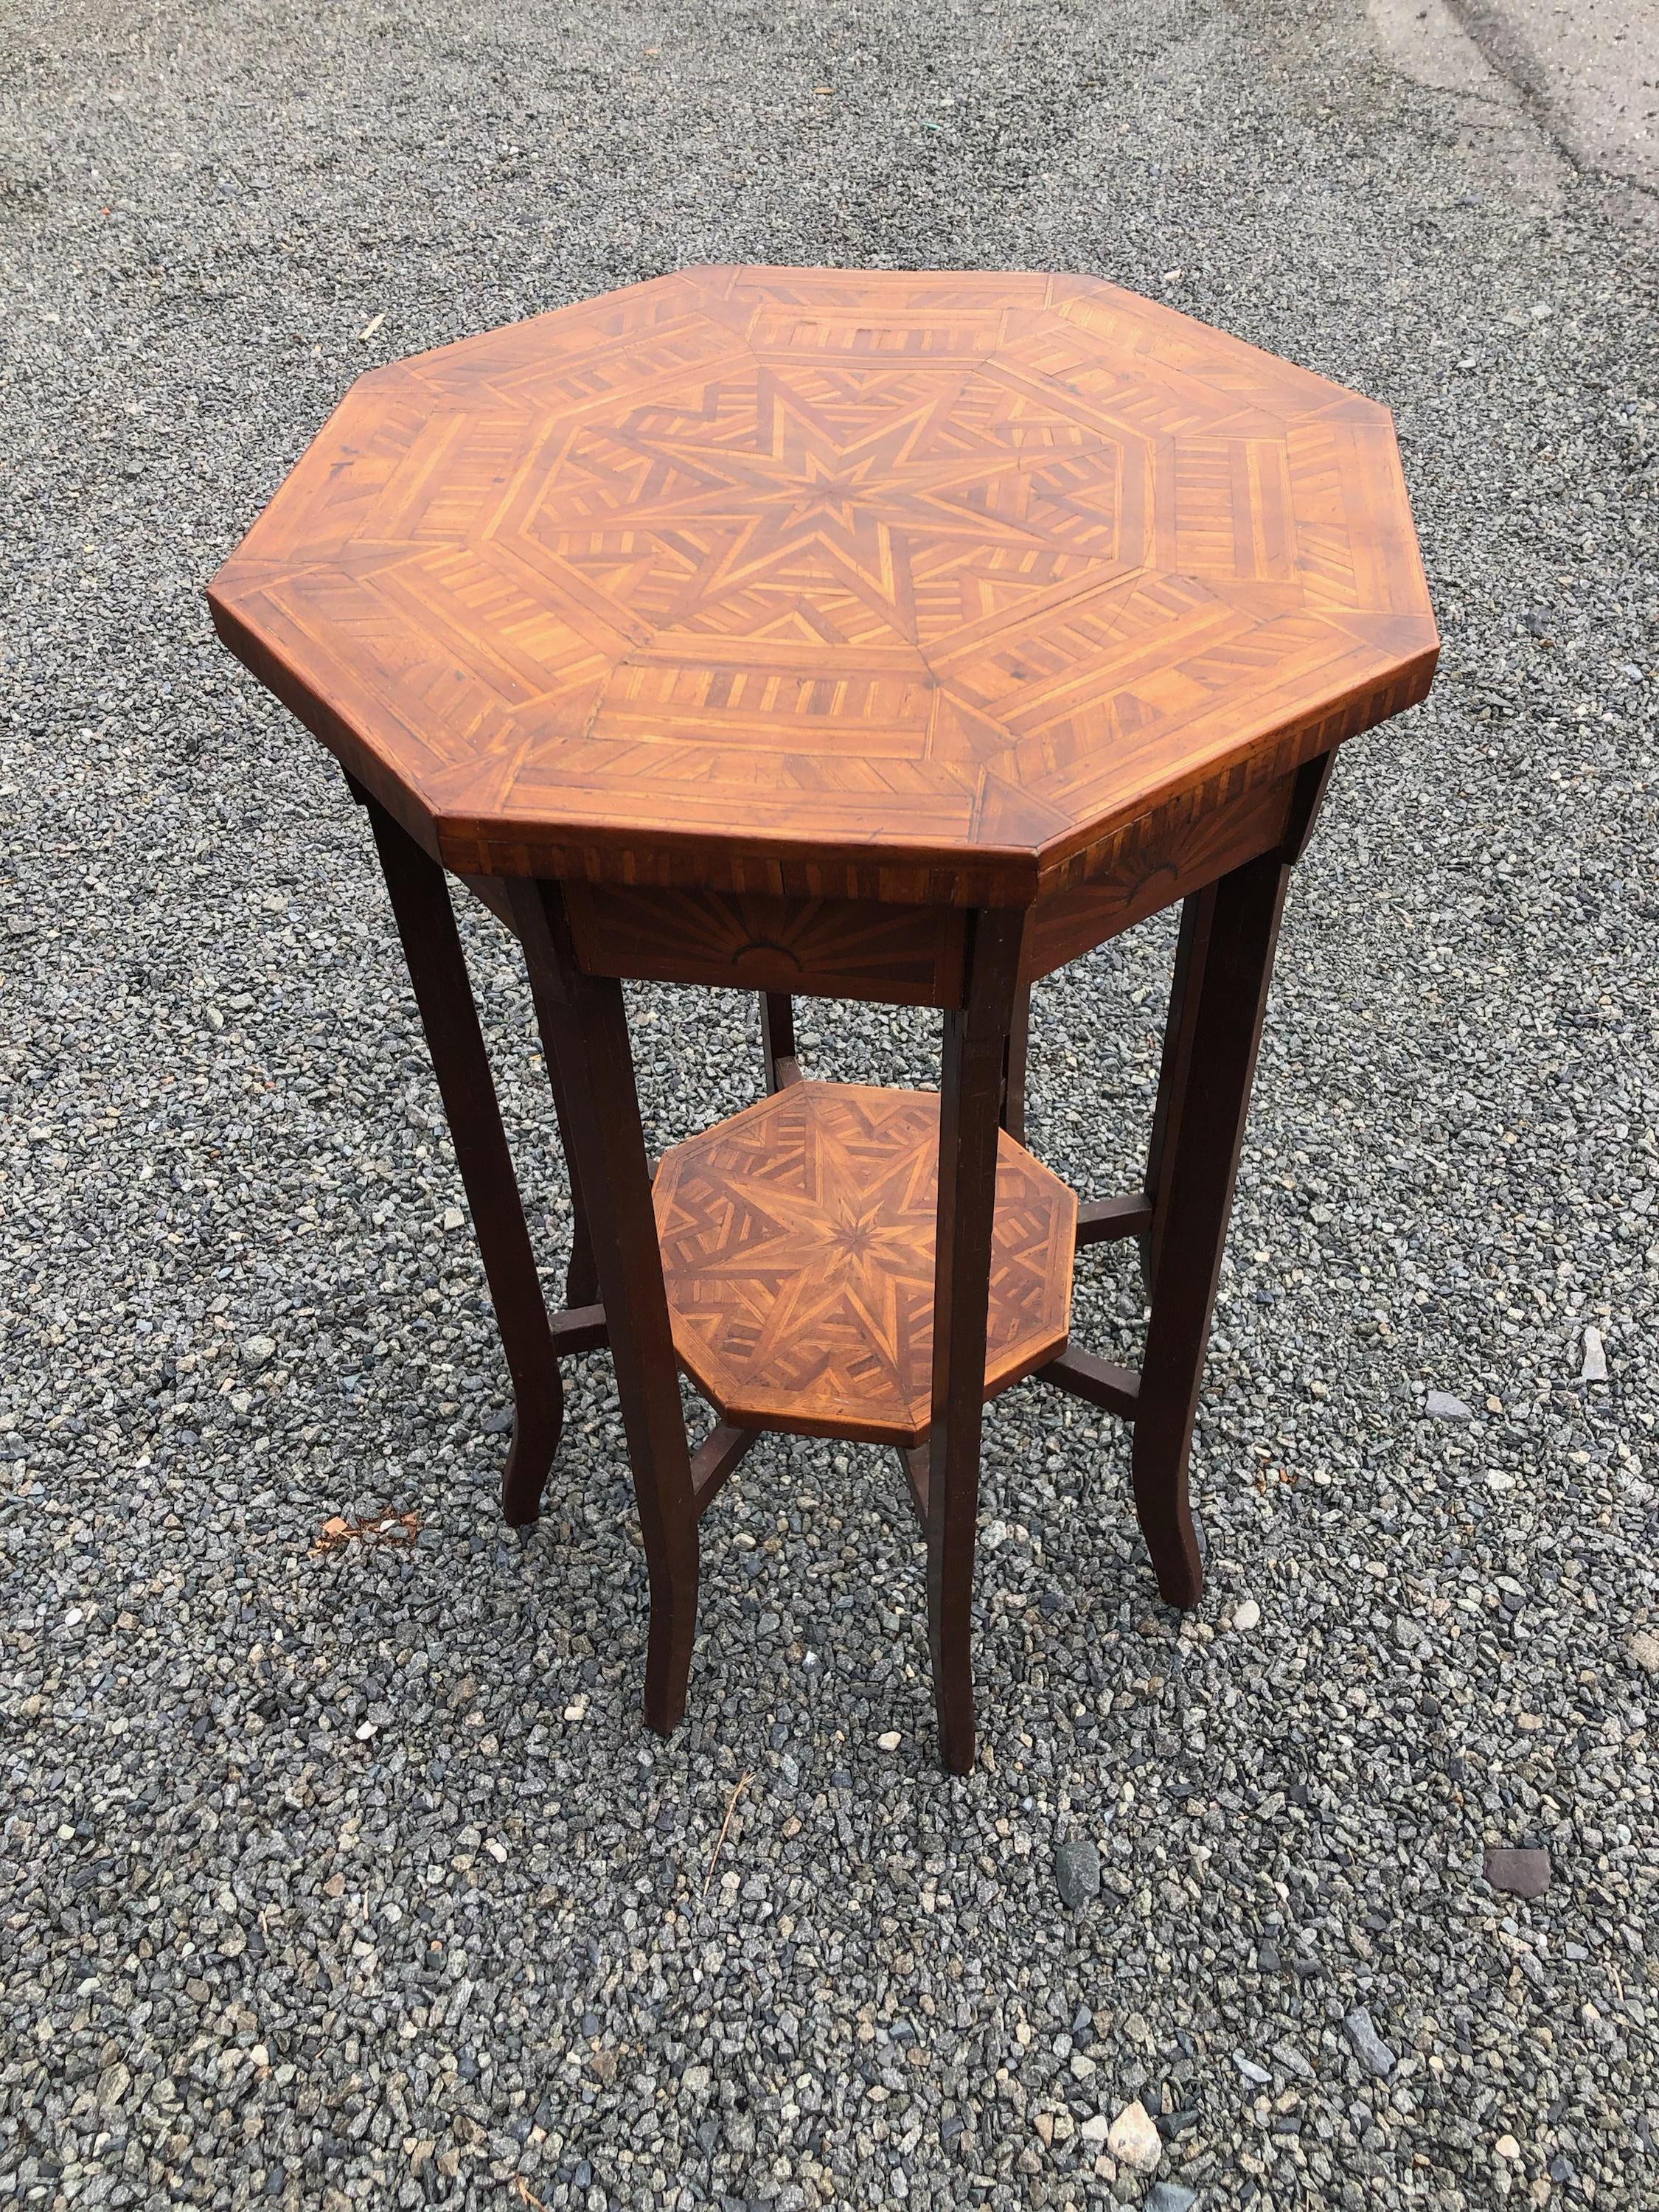 Inlay Elegant Antique Octagonal Side End Table with Inlaid Starburst Design